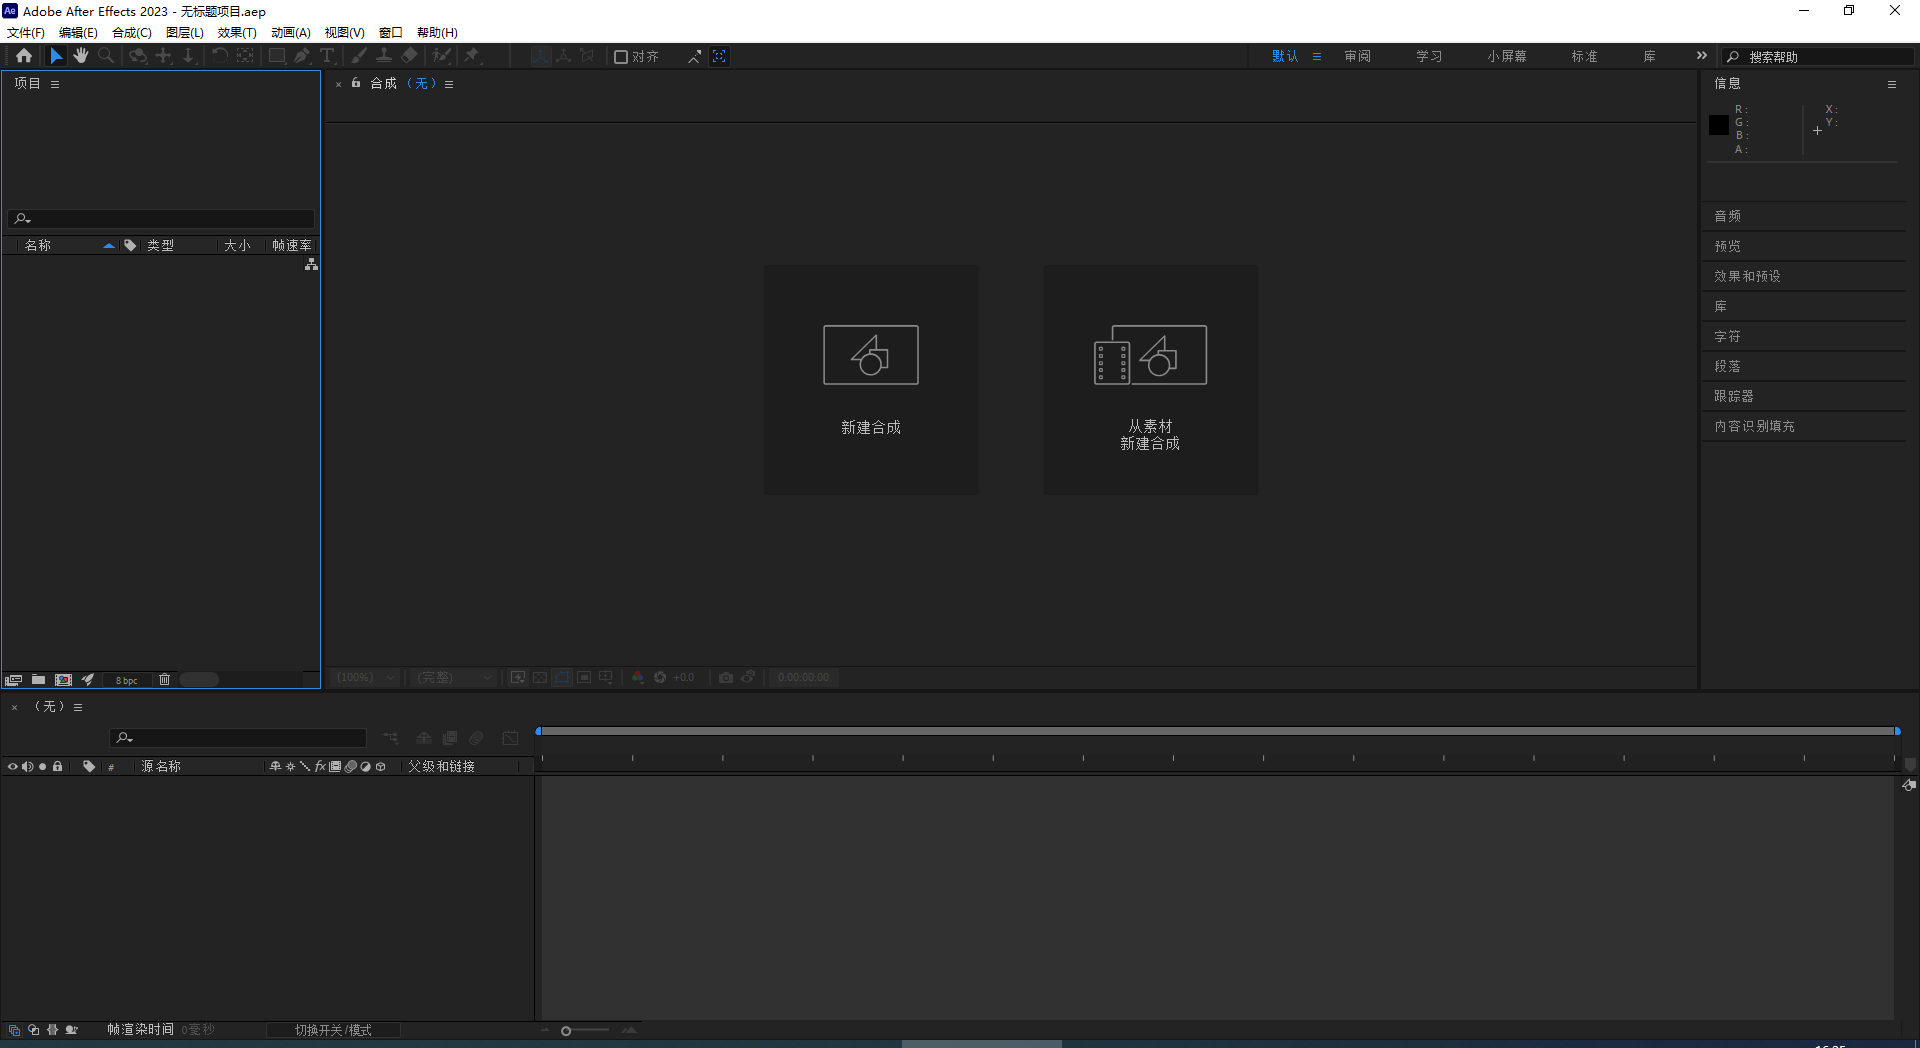 download the last version for apple Adobe After Effects 2023 v23.5.0.52